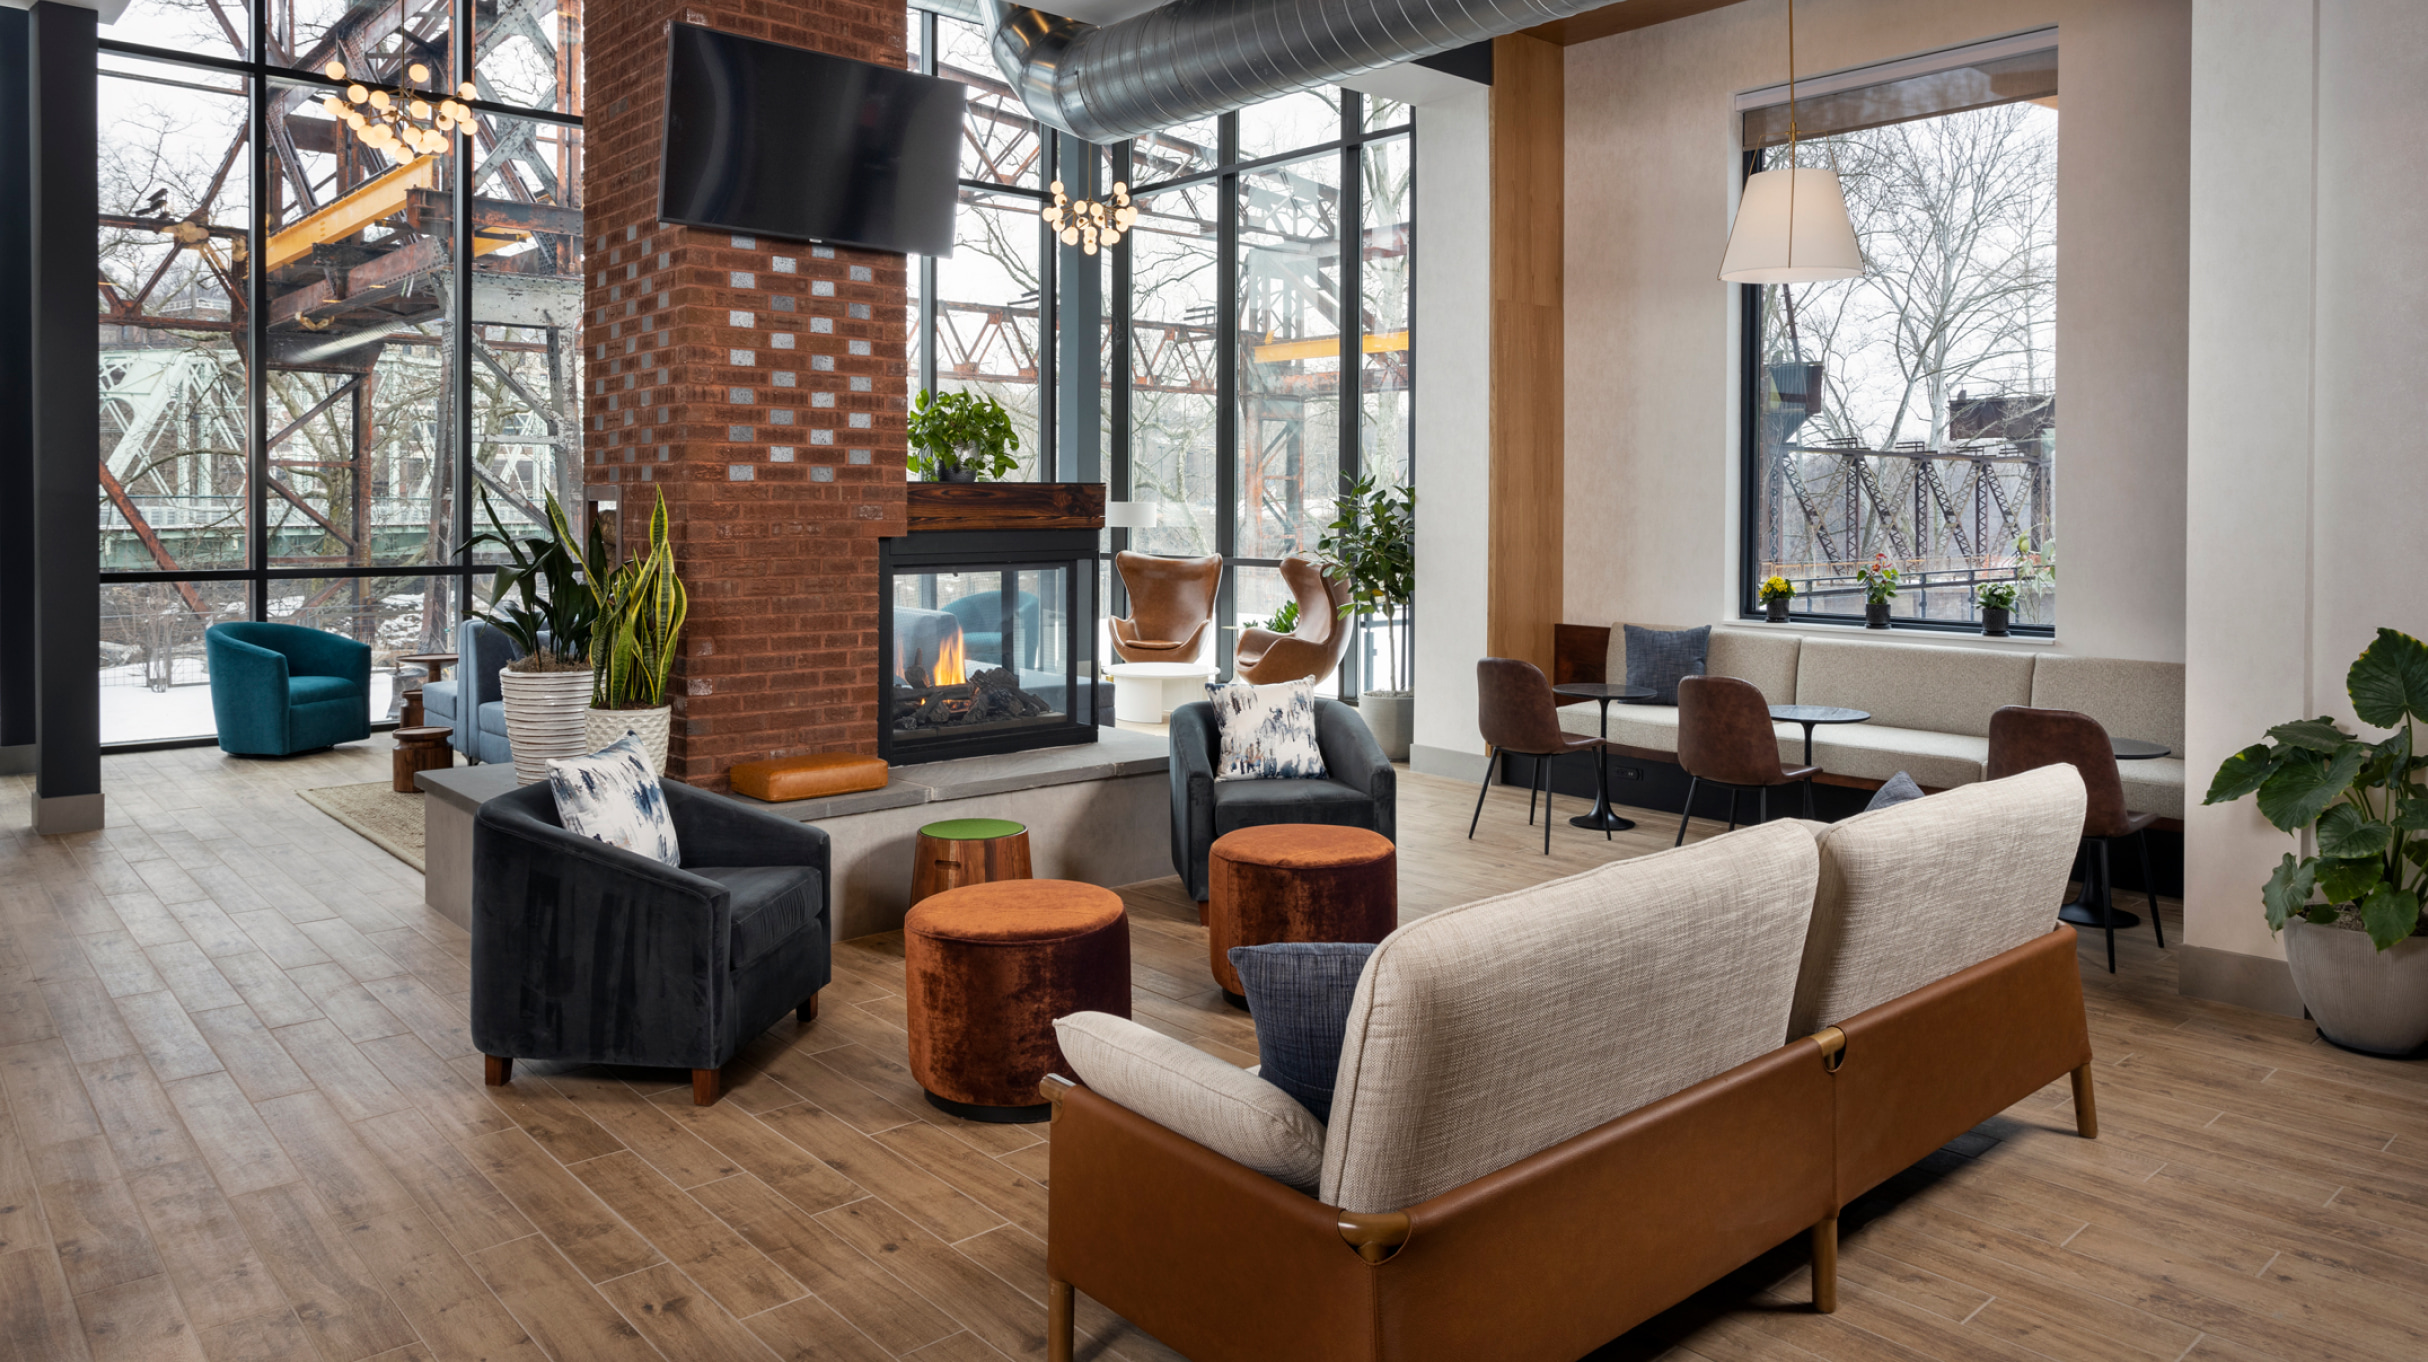 Pencoyd lobby with sofa, chairs, tables and fireplace